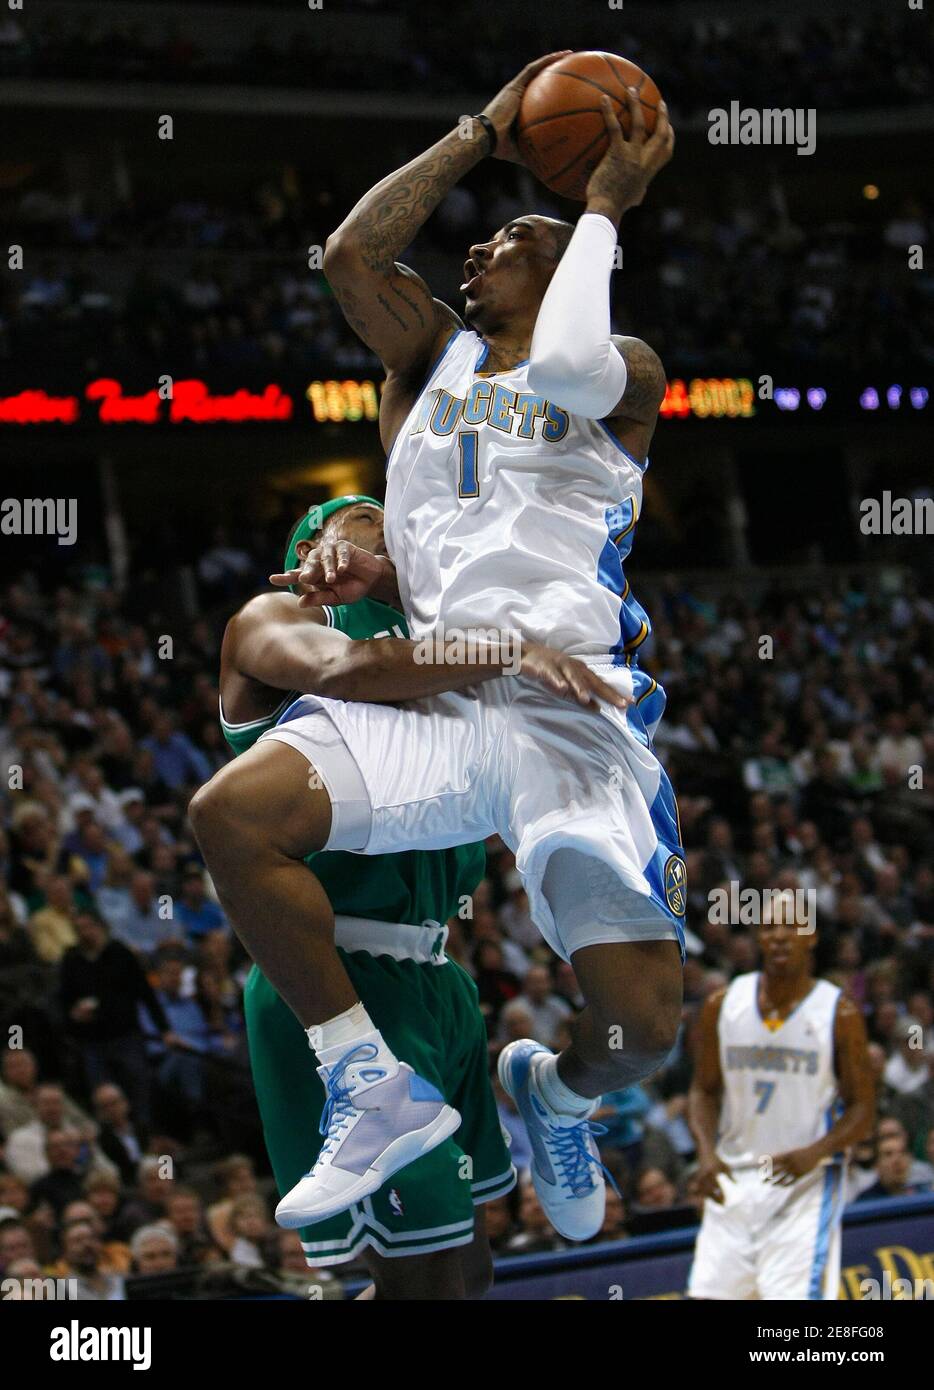 Denver Nuggets guard J.R.Smith (R) goes up past Boston Celtics forward Paul Pierce in their NBA basketball game in Denver February 23, 2009. REUTERS/Rick Wilking (UNITED STATES) Stock Photo